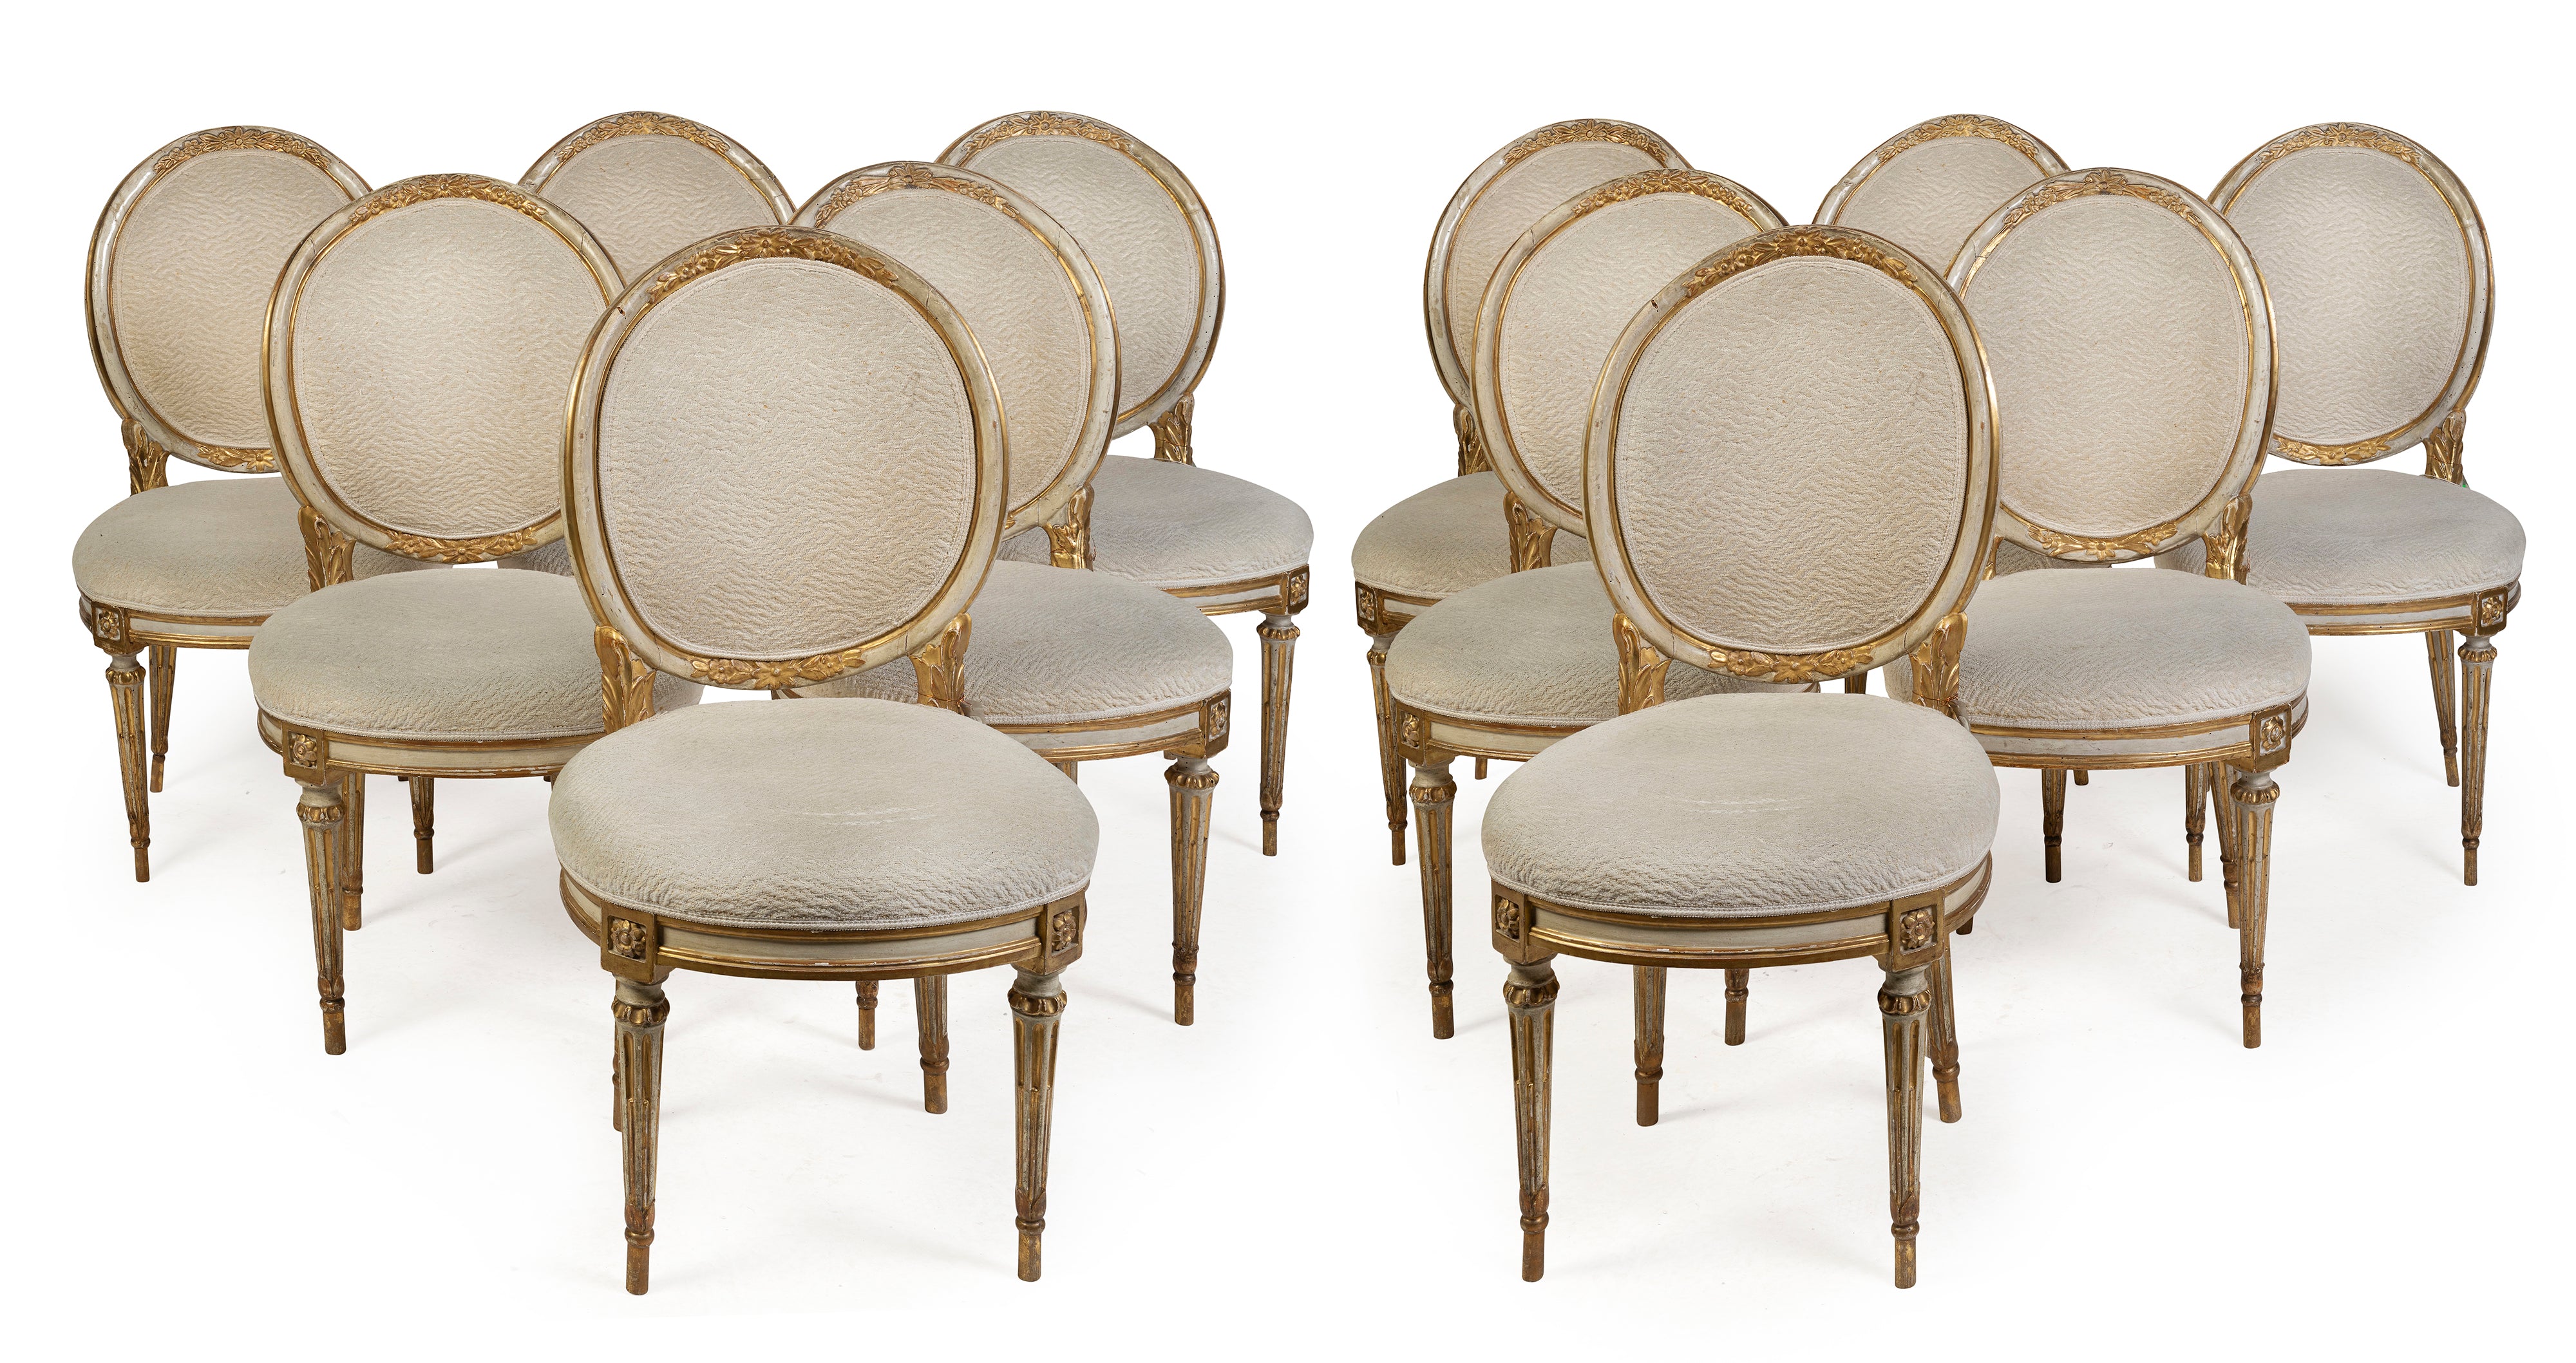 A Set of Twelve Antique Italian Louis XVI Painted and Parcel Gilt Dining Chairs